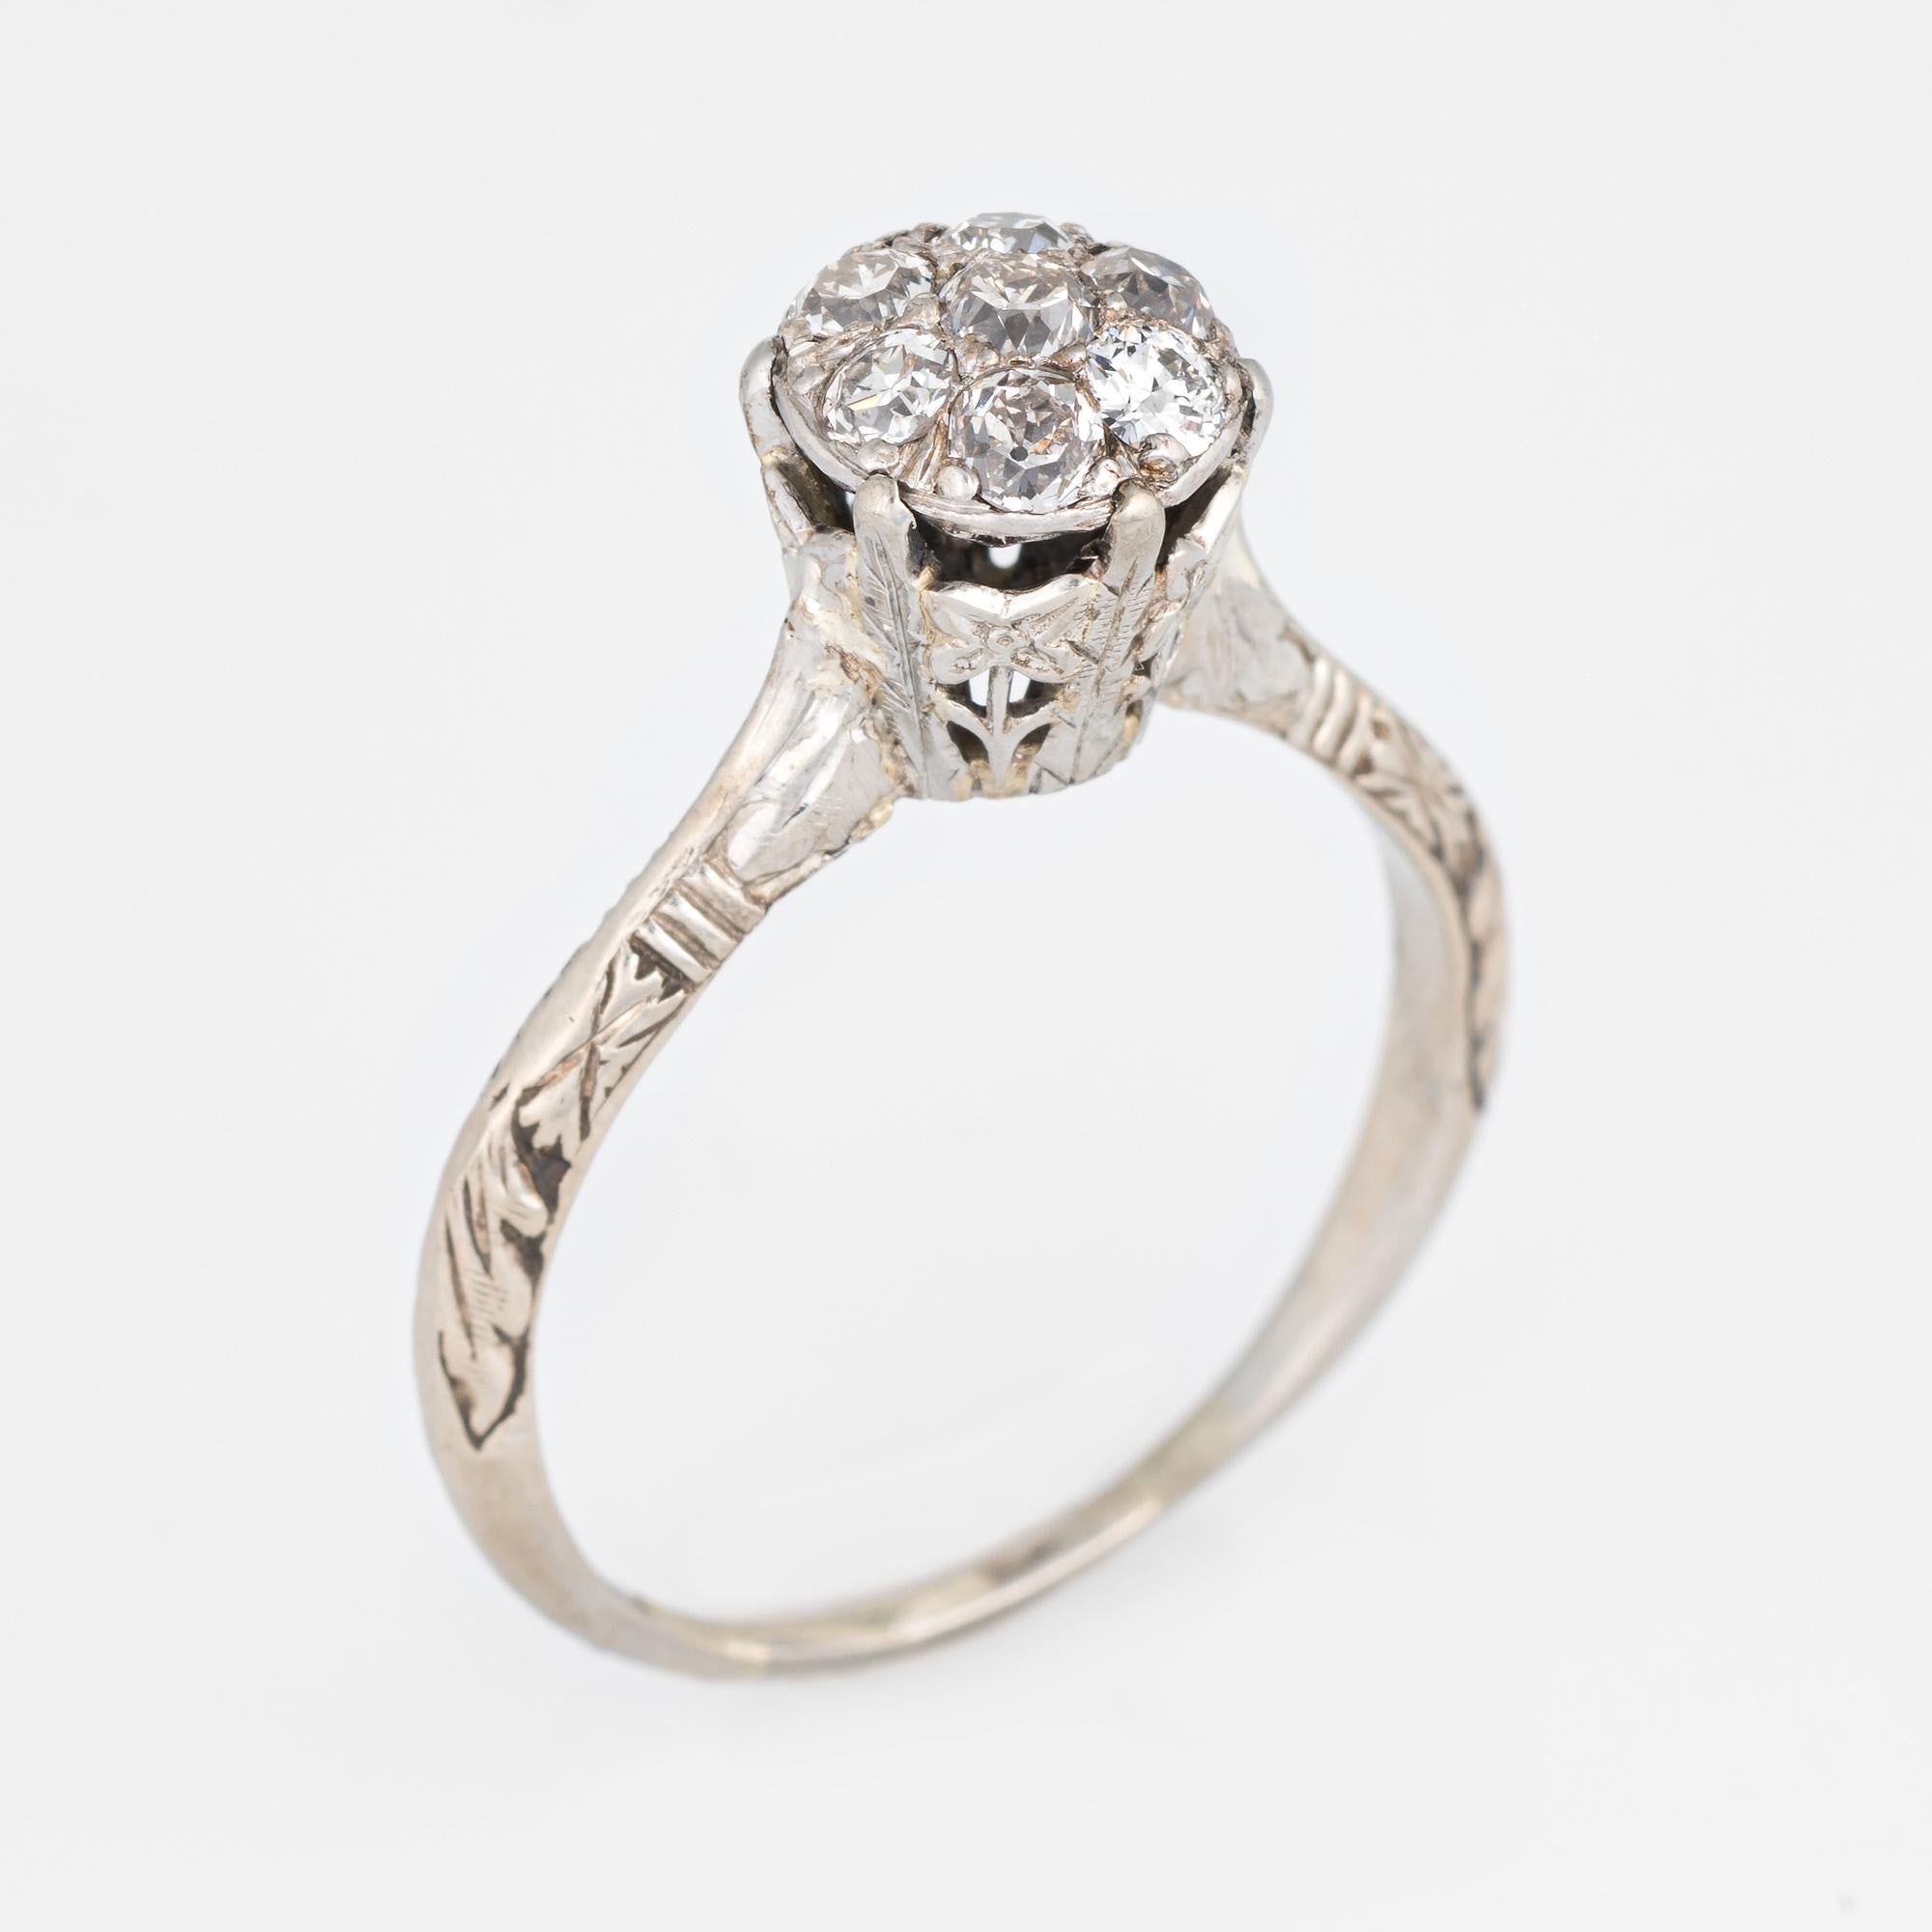 Elegant vintage Art Deco era ring (circa 1920s to 1930s) crafted in 18 karat white gold. 

Centrally mounted old European cut diamonds are estimated at 0.05 carats each (7 total). The total diamond weight is estimated at 0.35 carats (estimated at